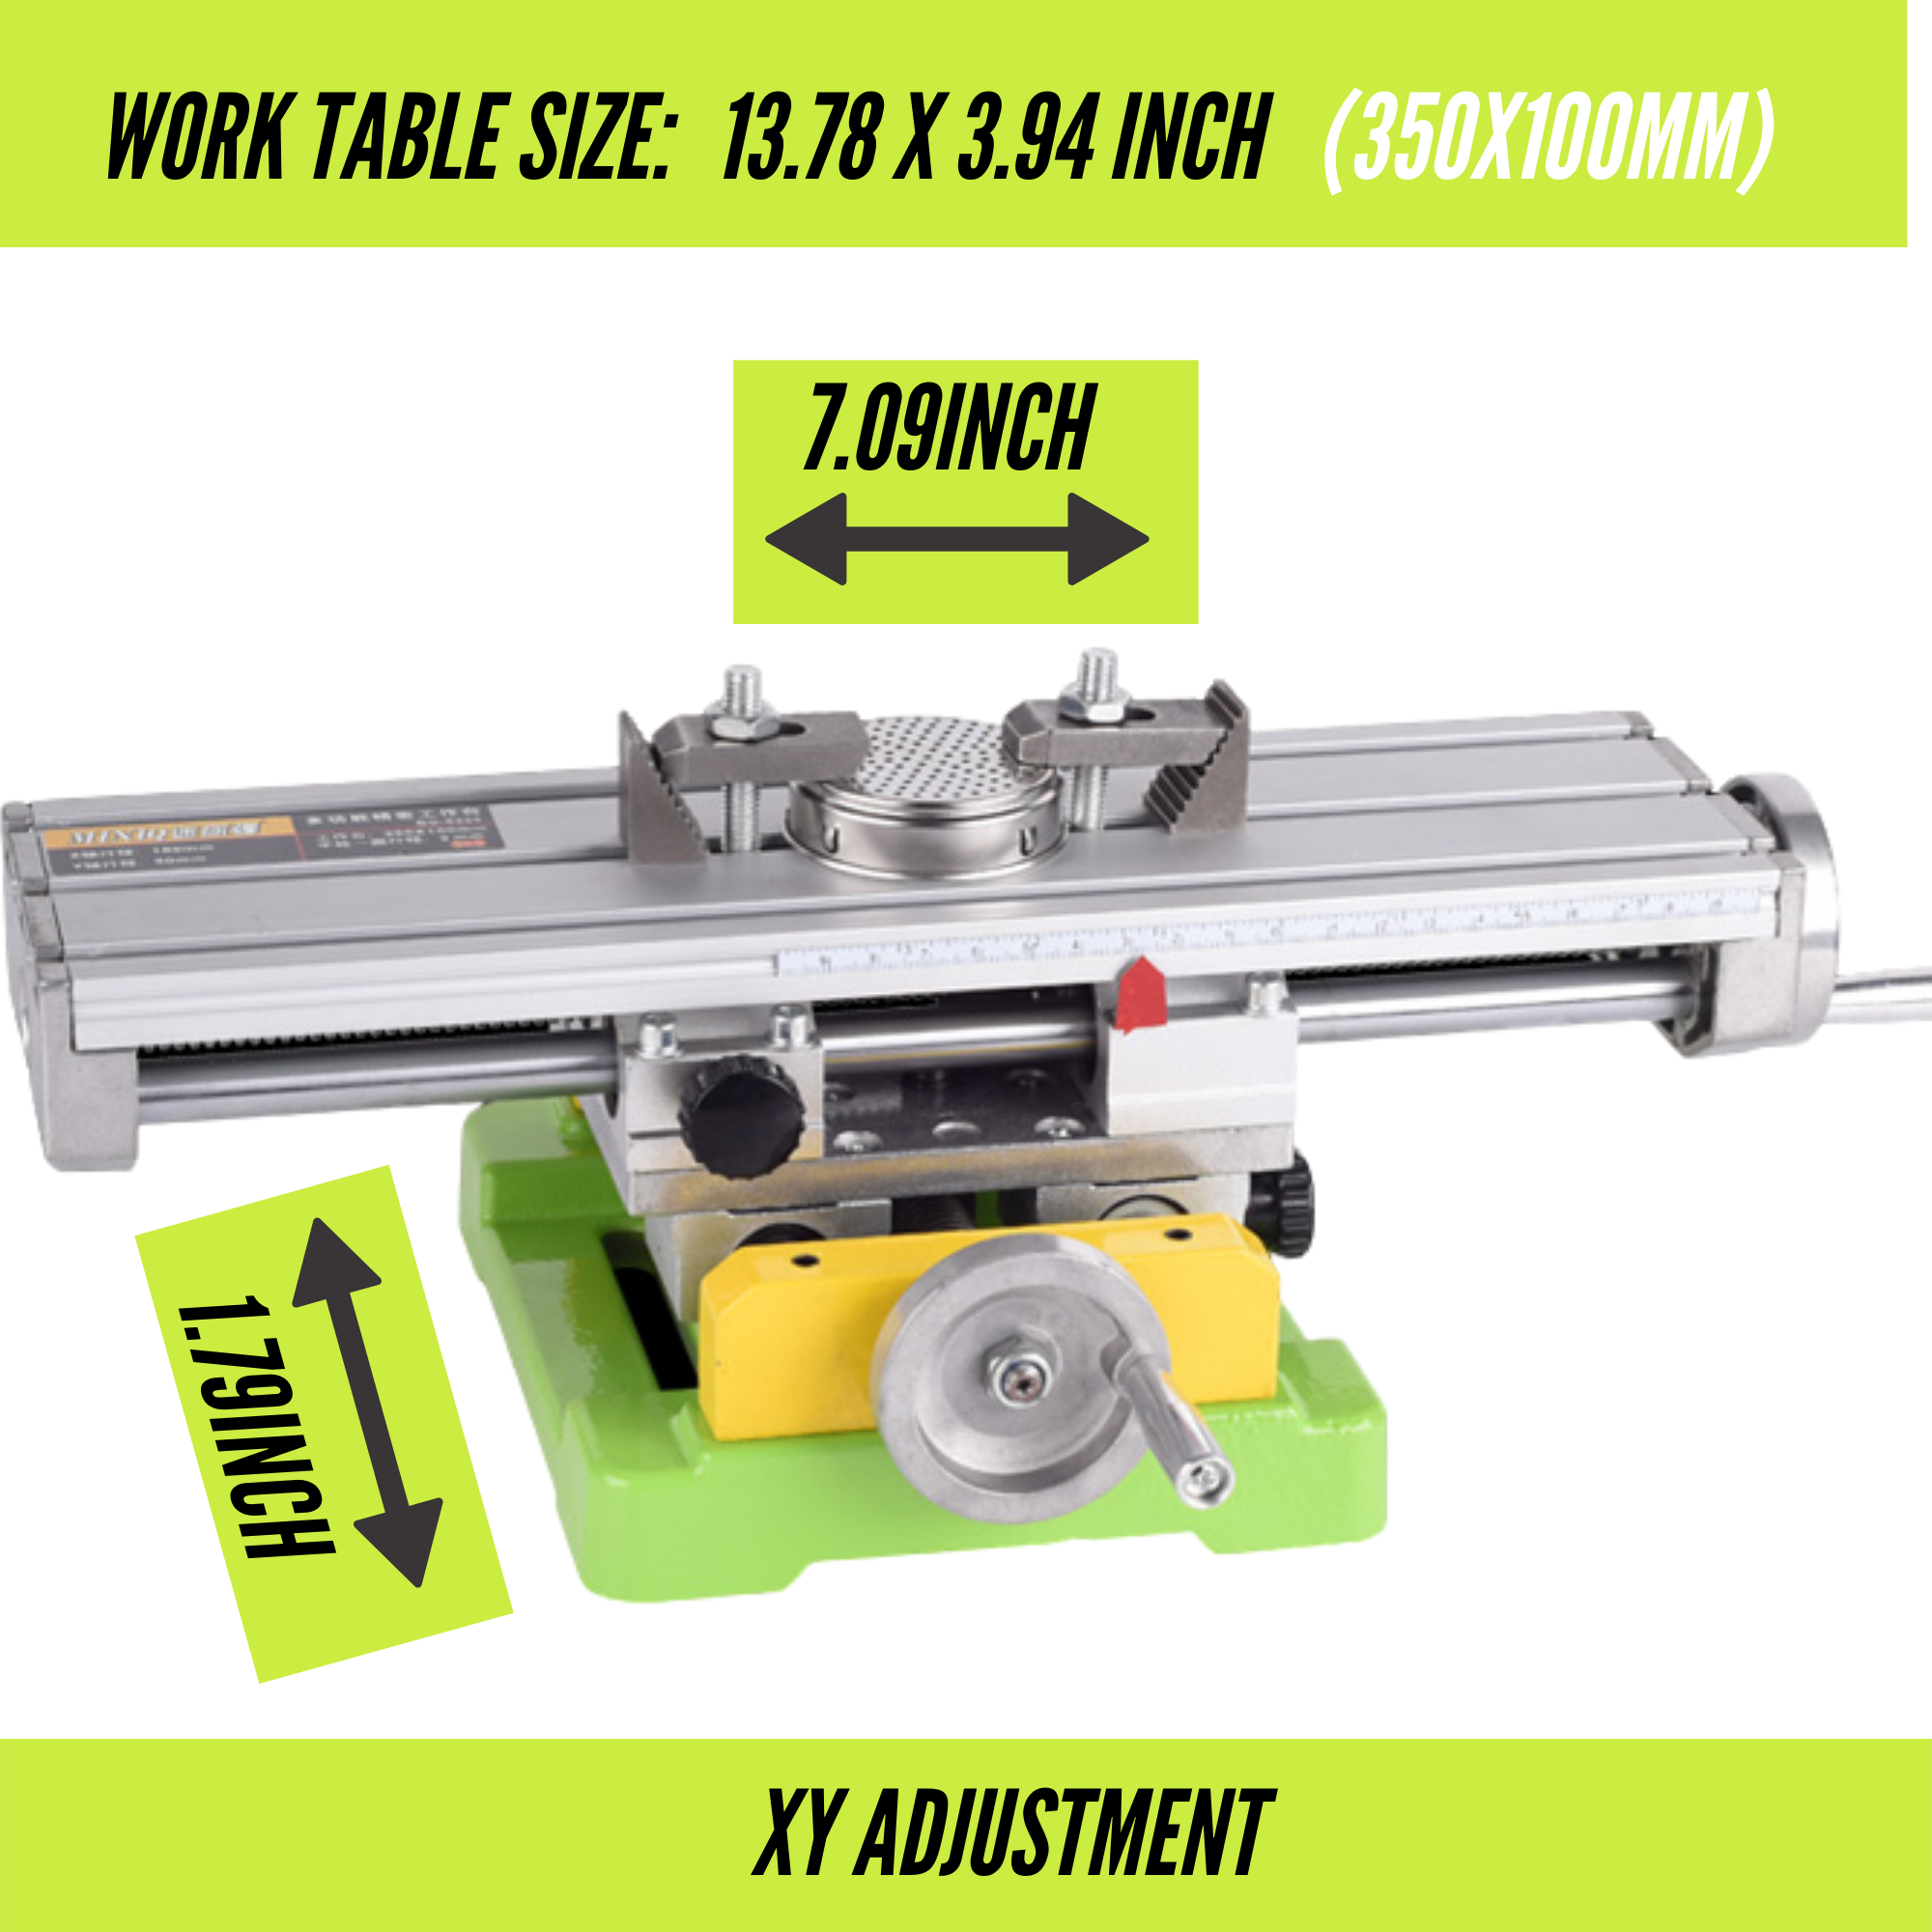 X//Y 2 Axis 4 Ways Movable Cross Slide Bench Table Multifunction Heavy Duty Milling Drilling Machine Supporting Worktable Tools Improvements